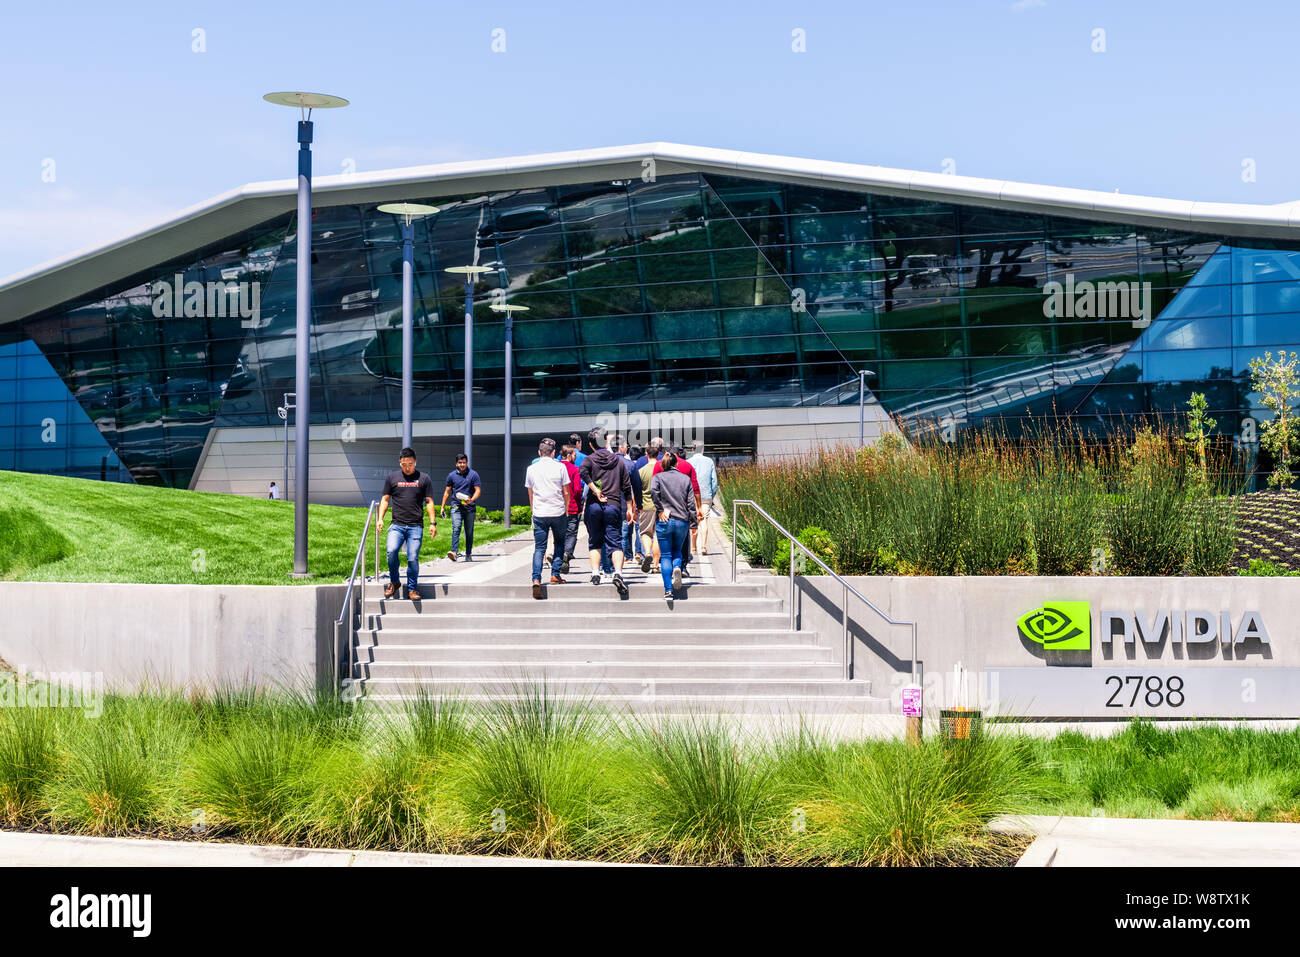 August 9, 2019 Santa Clara / CA / USA - People walking towards the entrance  to Nvidia Endeavor office building at the Company's corporate HQ in Silico  Stock Photo - Alamy